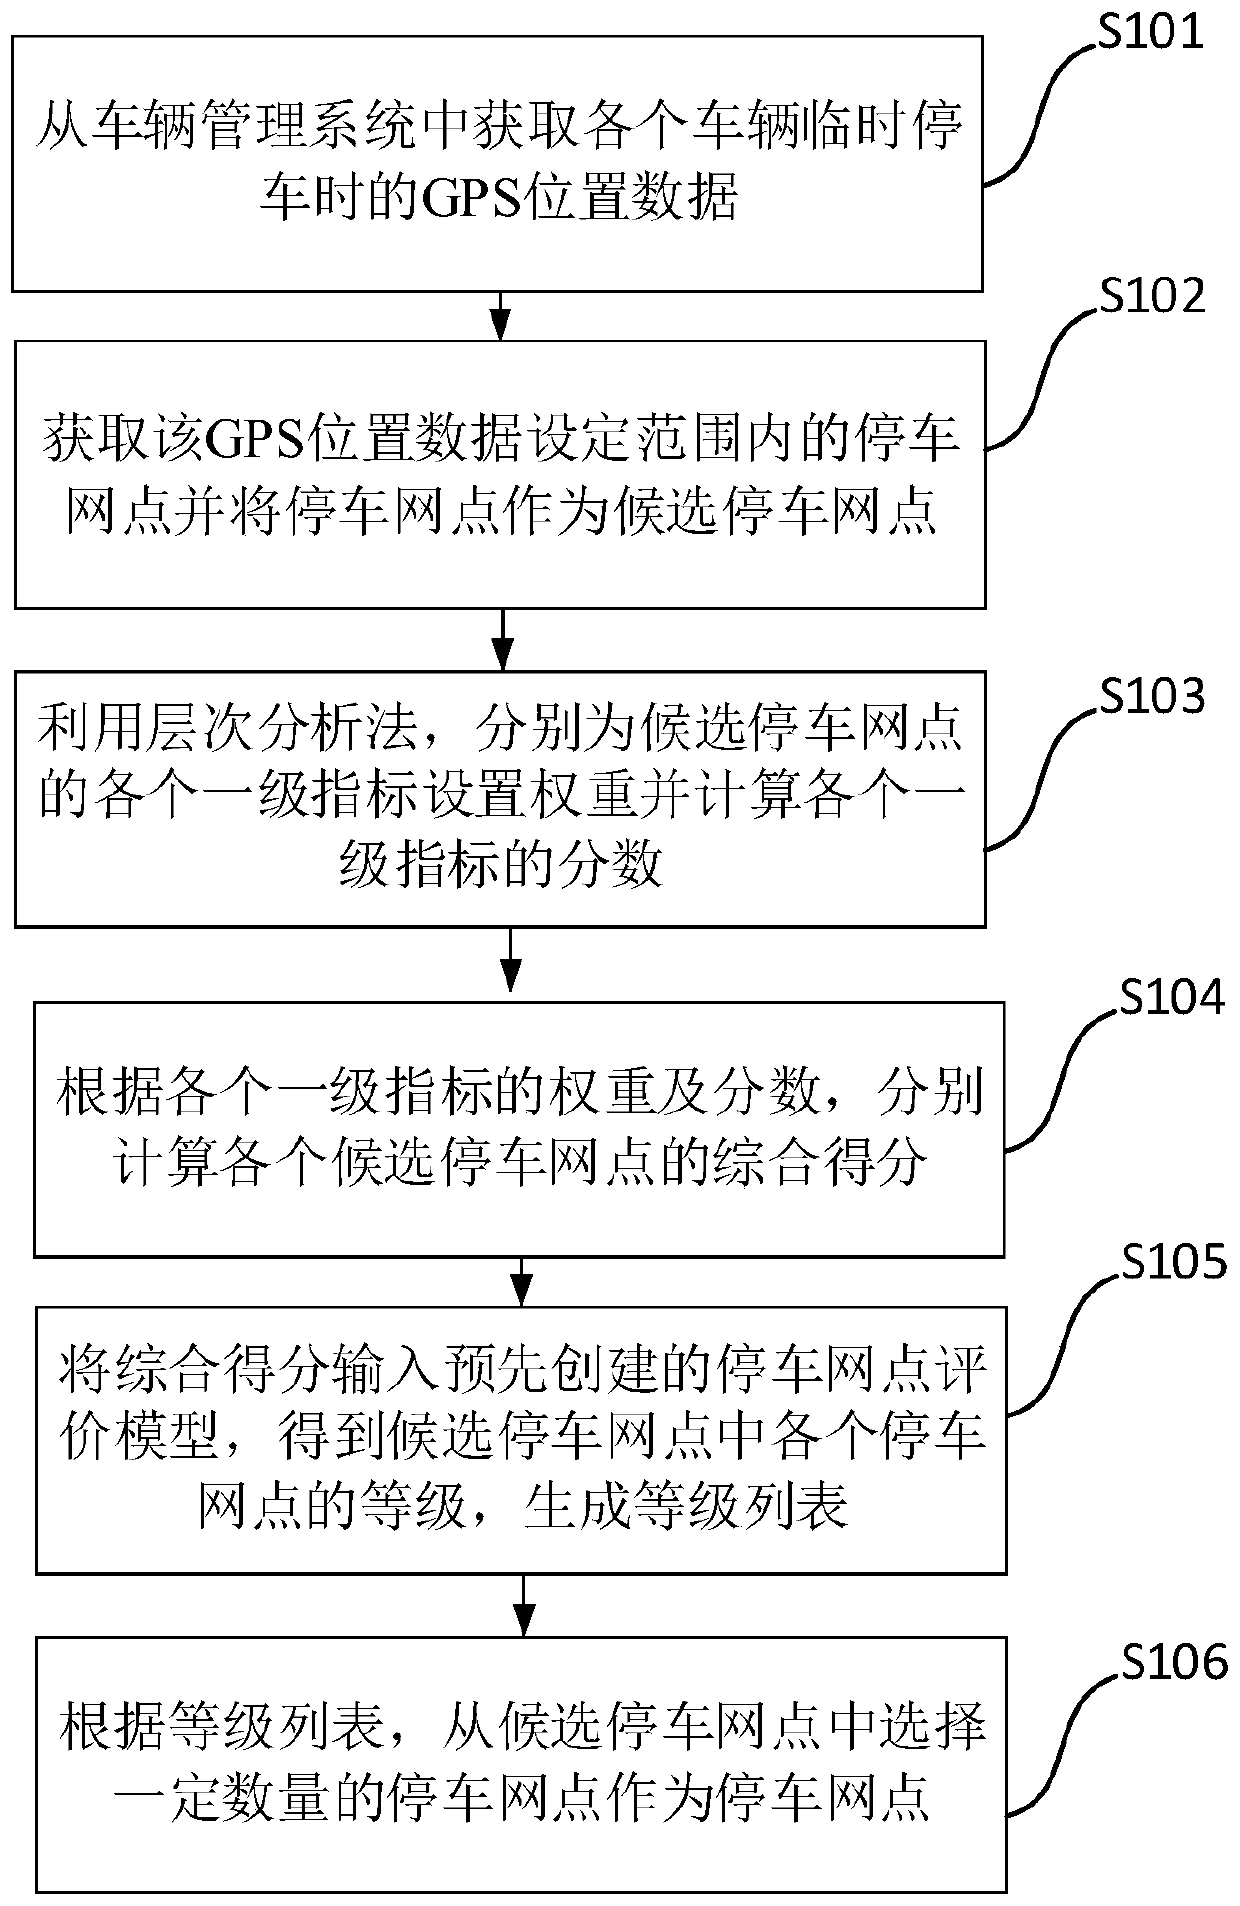 Shared automobile parking network point determining method based on automobile using behaviors